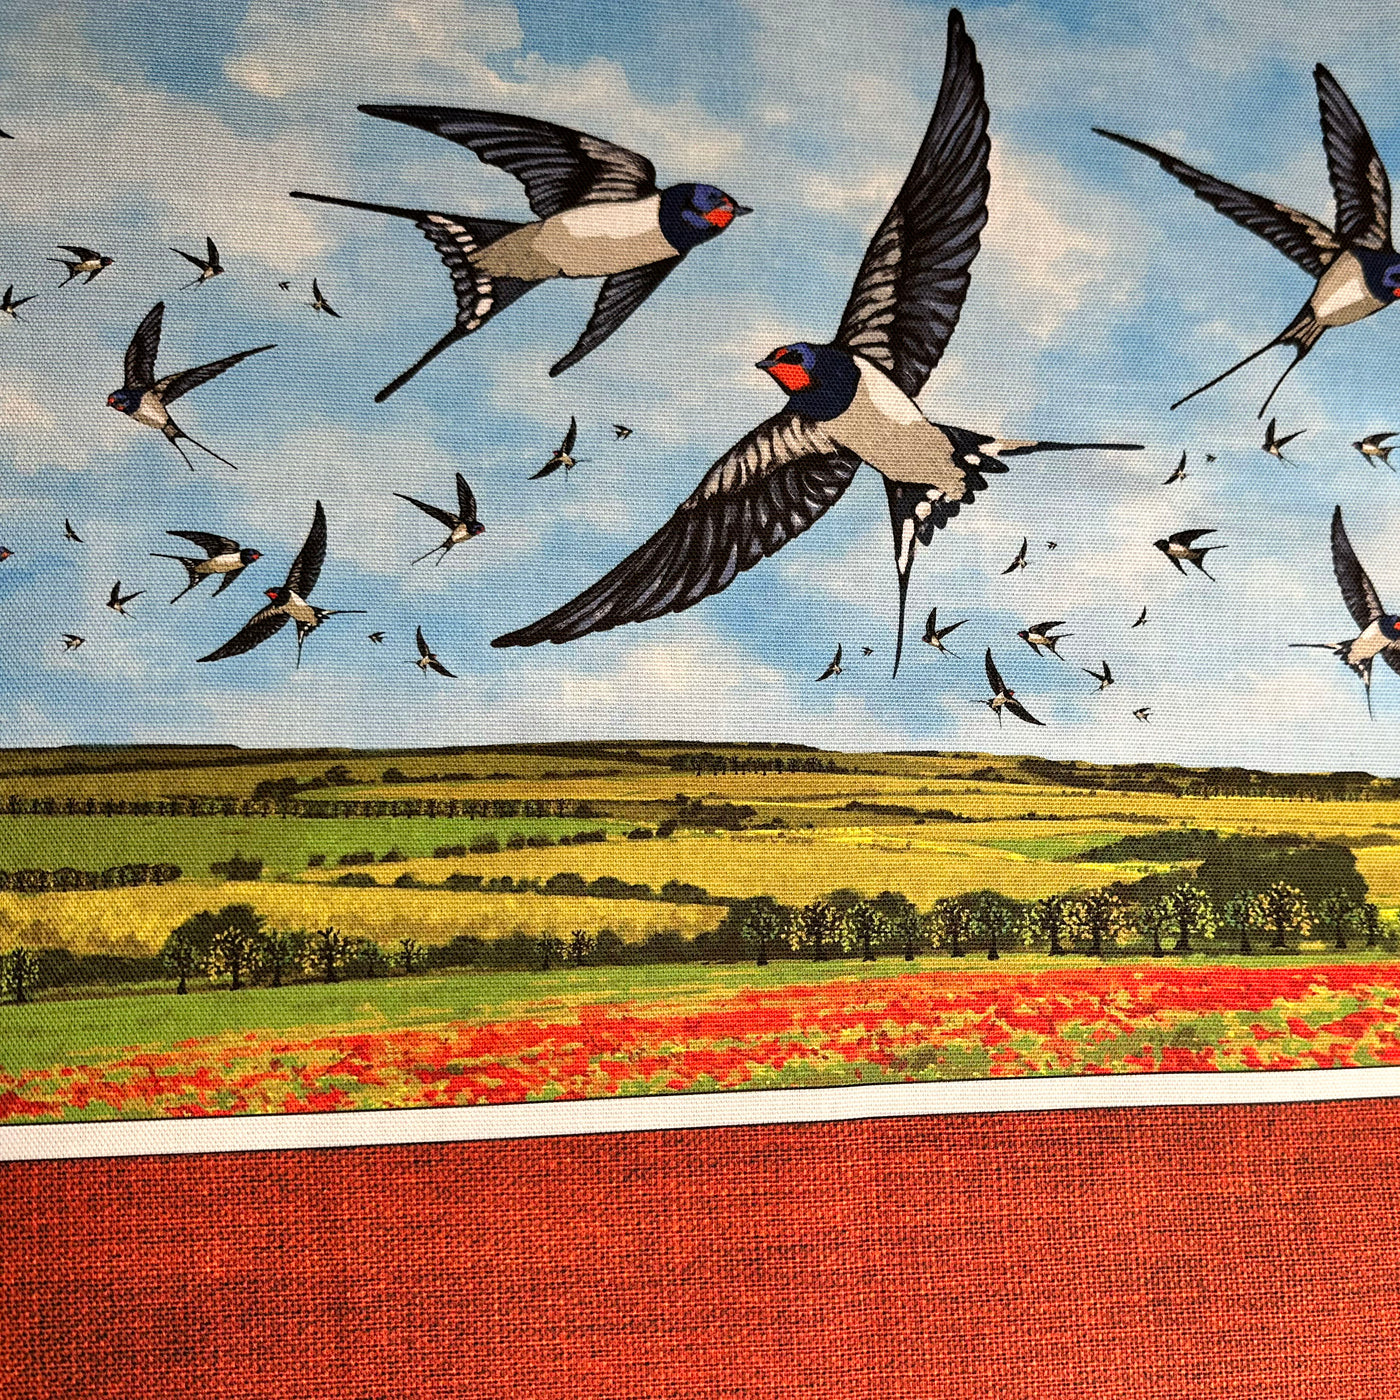 The Totally Tote - Swallows In The Sky Sewing Kit